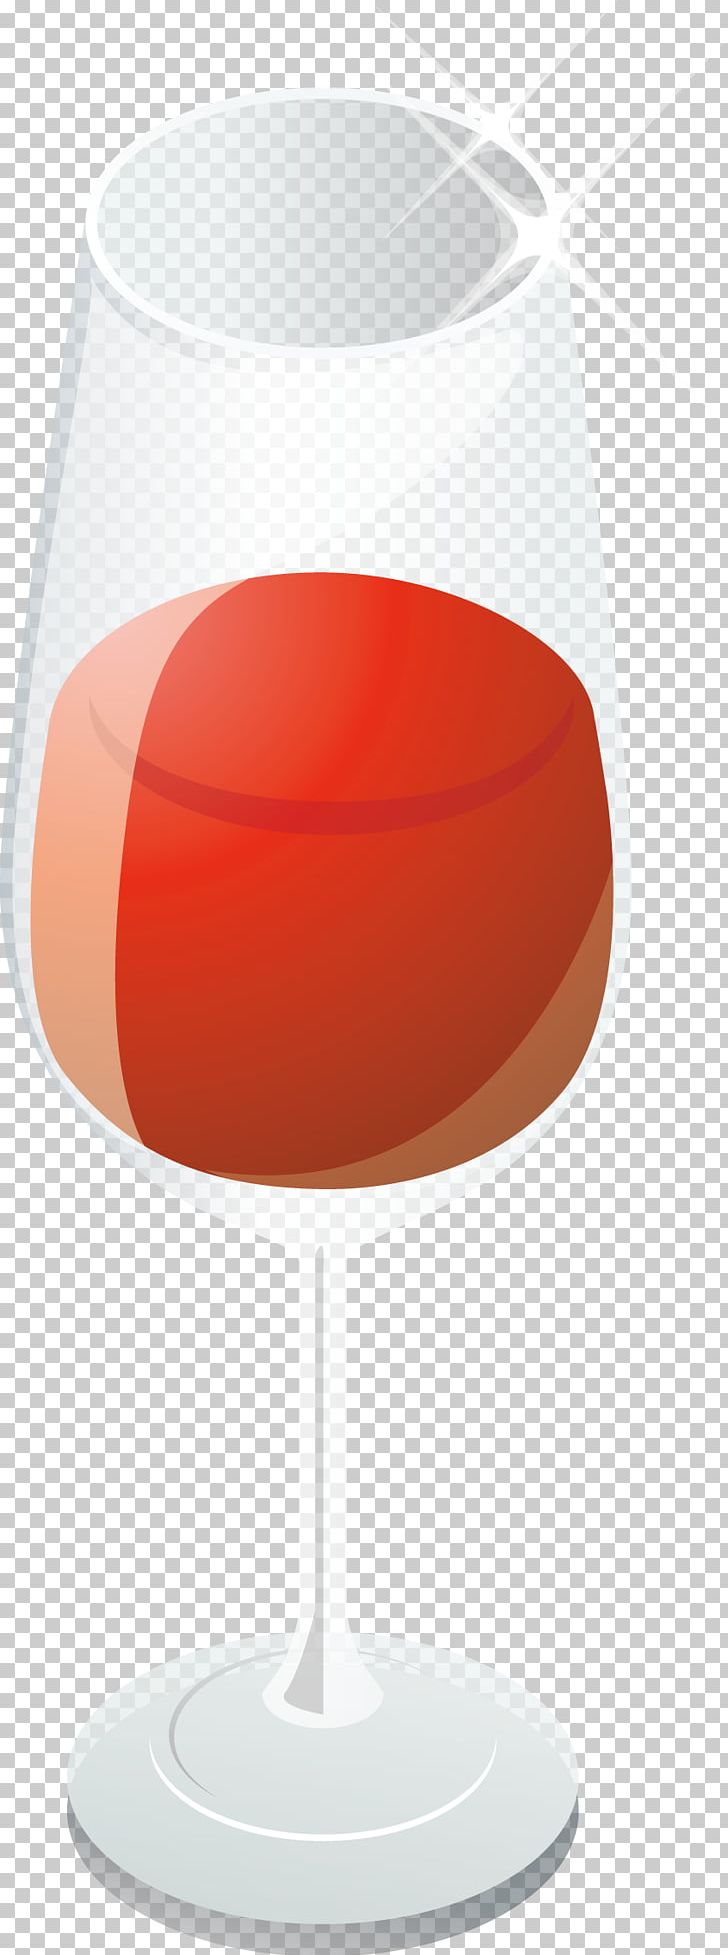 Red Wine Wine Glass PNG, Clipart, Cup, Download, Drinkware, Exquisite Vector, Glass Free PNG Download